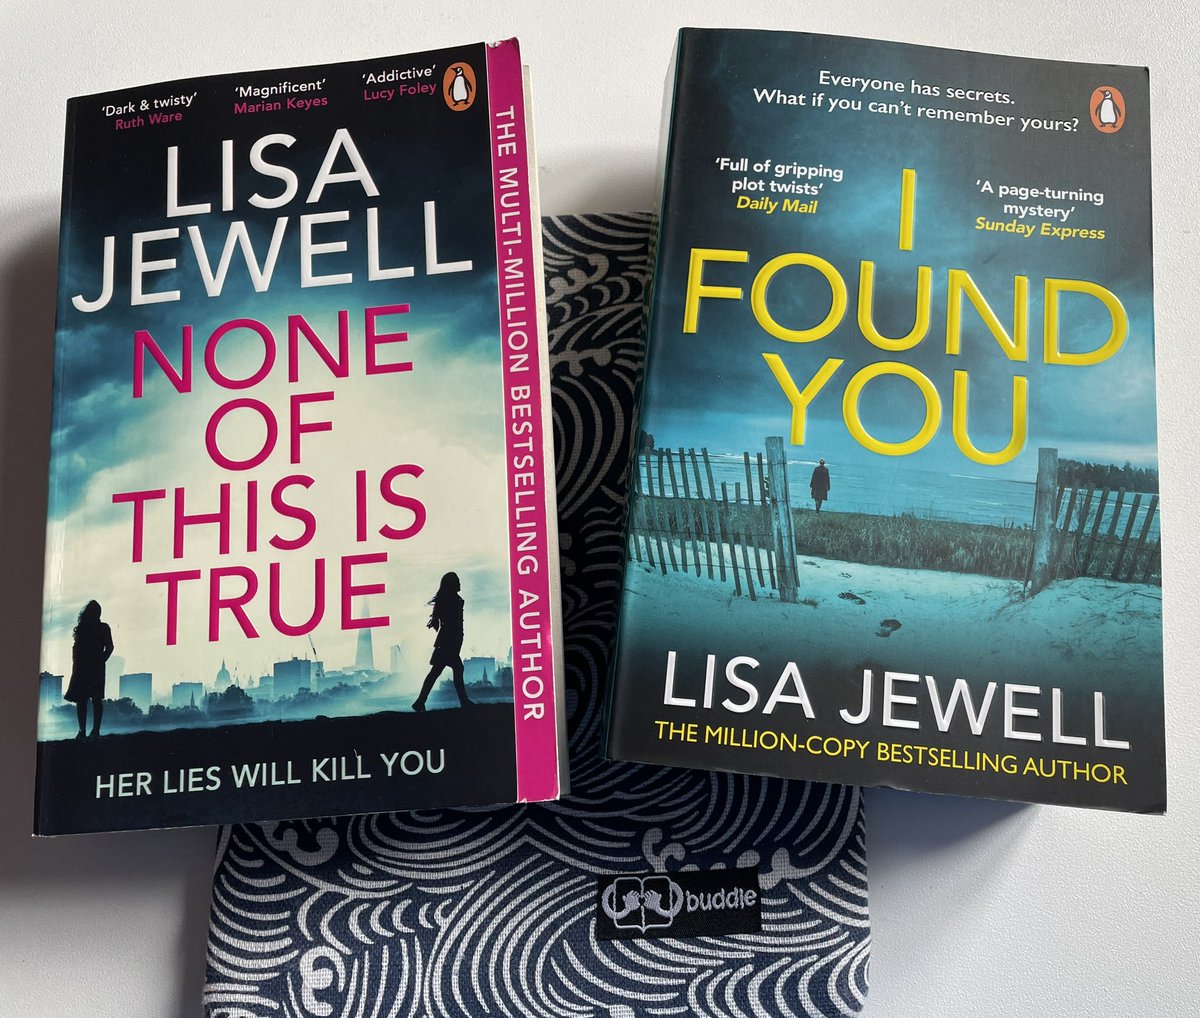 Just finished #NoneOfThisIsTrue 
What a read 😱

Now to start one of my new birthday books #IFoundYou 

My friends know I love reading @lisajewelluk 📚